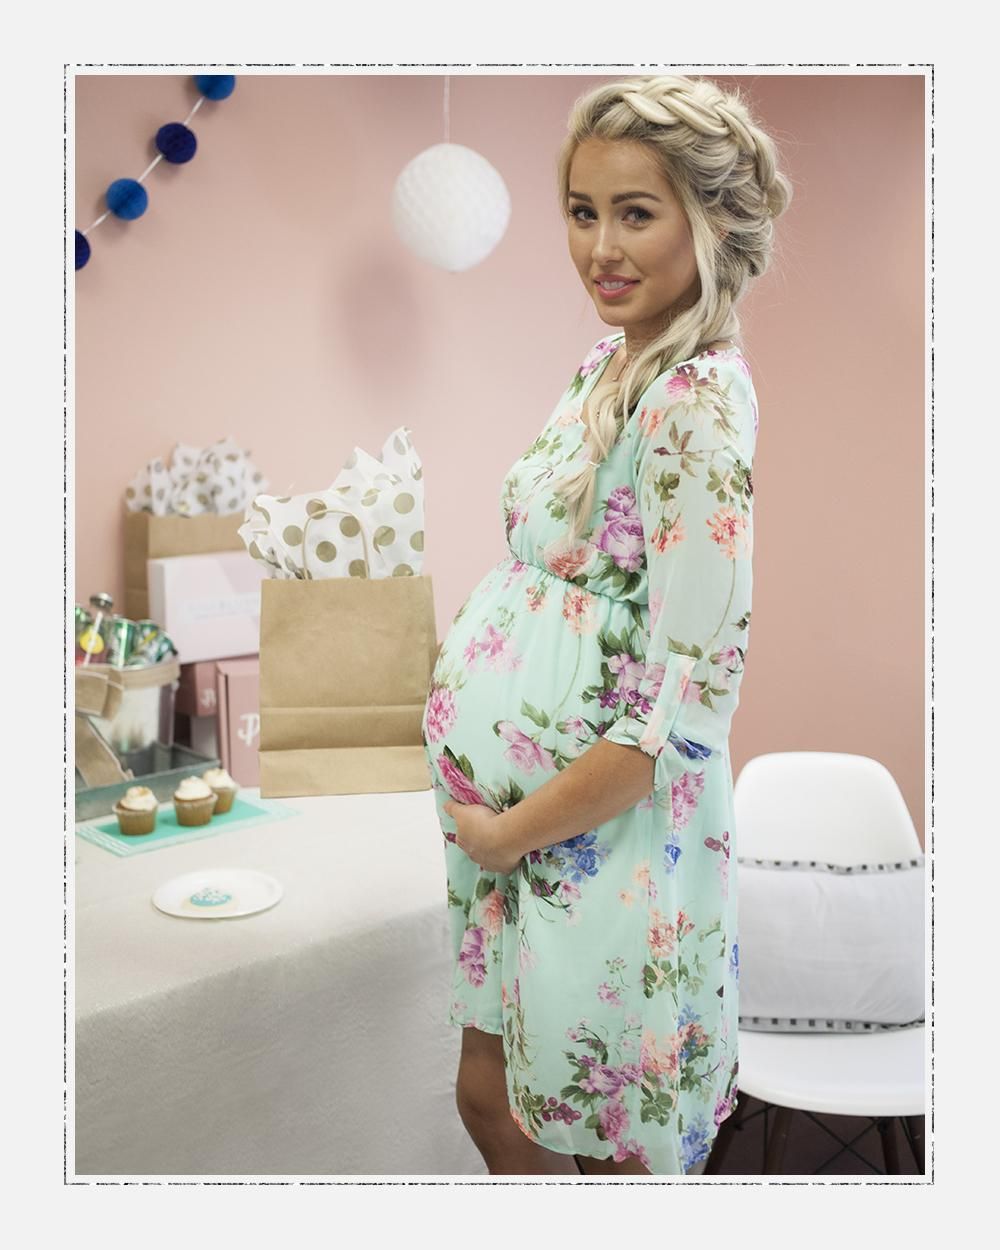 Full Size of Baby Shower:maternity Clothes H&m Showing Lsi Keywords For Baby Shower Dresses Maternity Evening Gowns Non Maternity Dresses For Baby Shower Maternity Gown Style Maternity Stores Near Me Plus Size Maternity Clothes Cheap Maternity Jeans